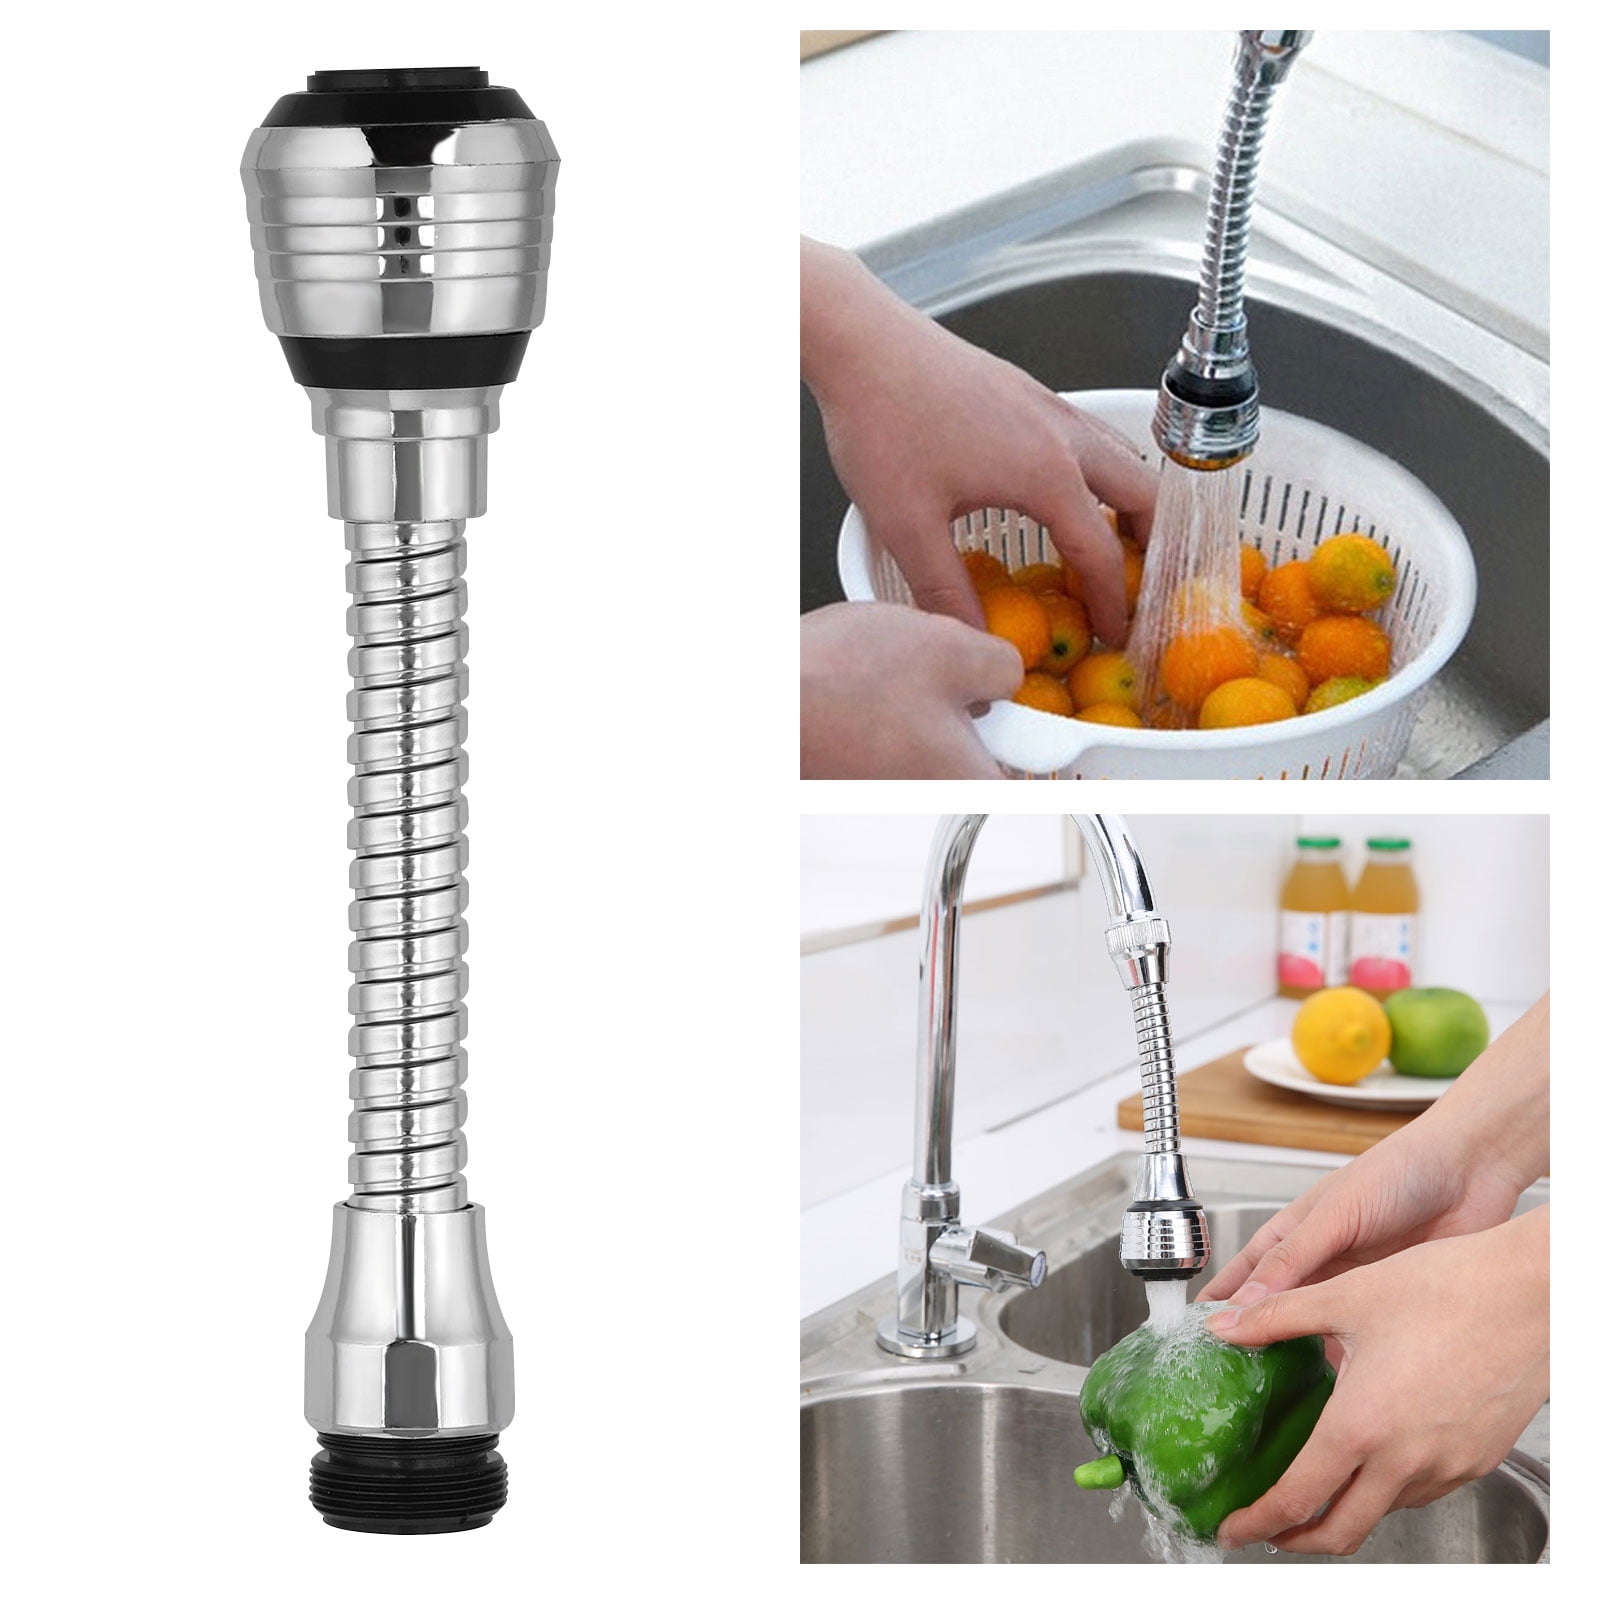 Rotatable Water Saving Tap Sink Faucet Nozzle Filter Kitchen Sprayer Swivel Rotating Head Aerator 